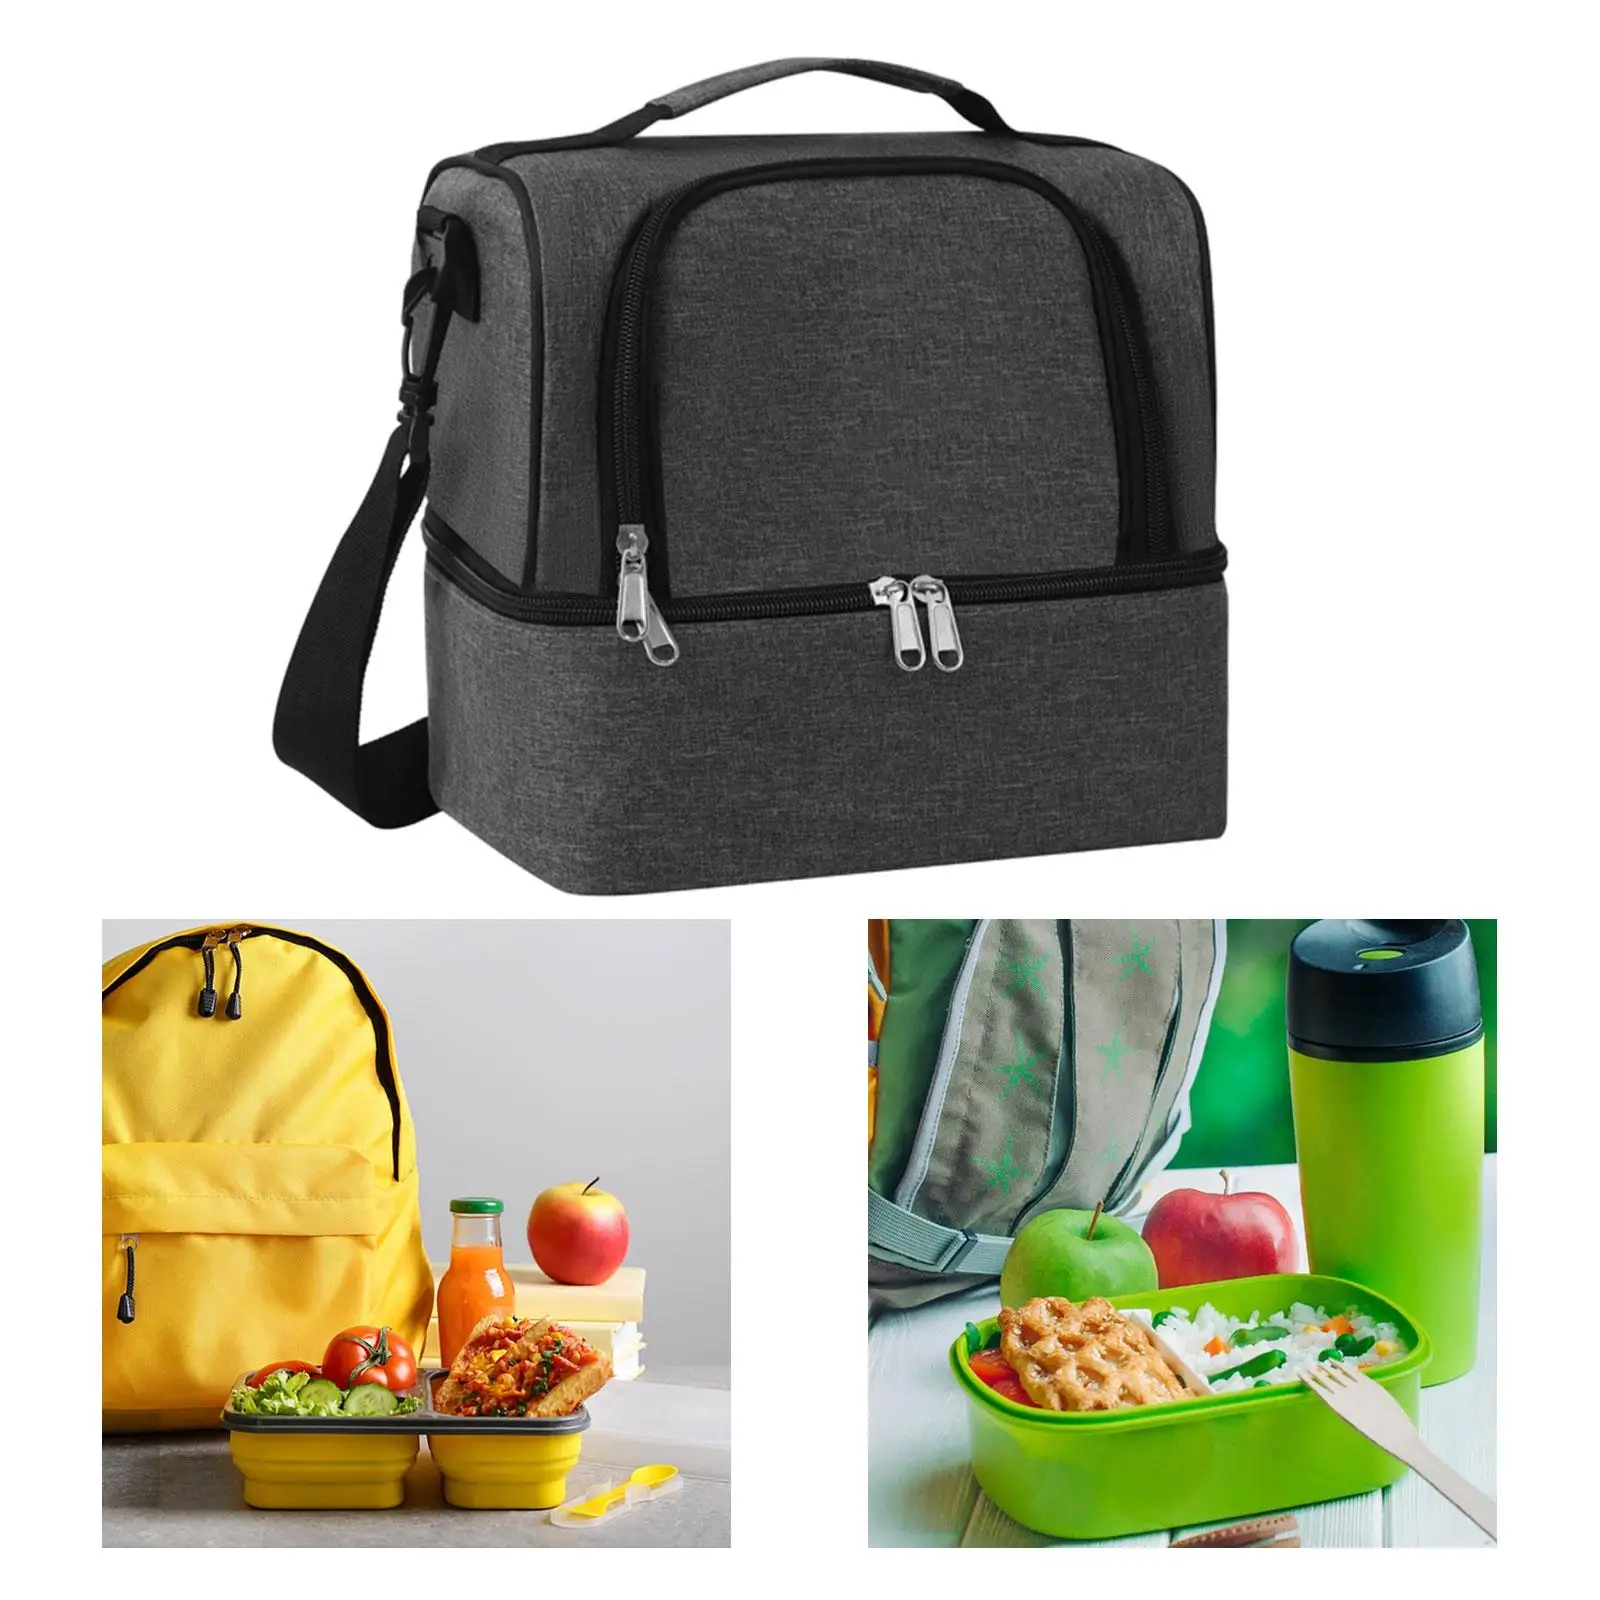 Insulated Lunch Case Leakproof Handbag Cool Tote Bag Bento Pouch Dinner Container for Outdoor Picnic Camping Work BBQ